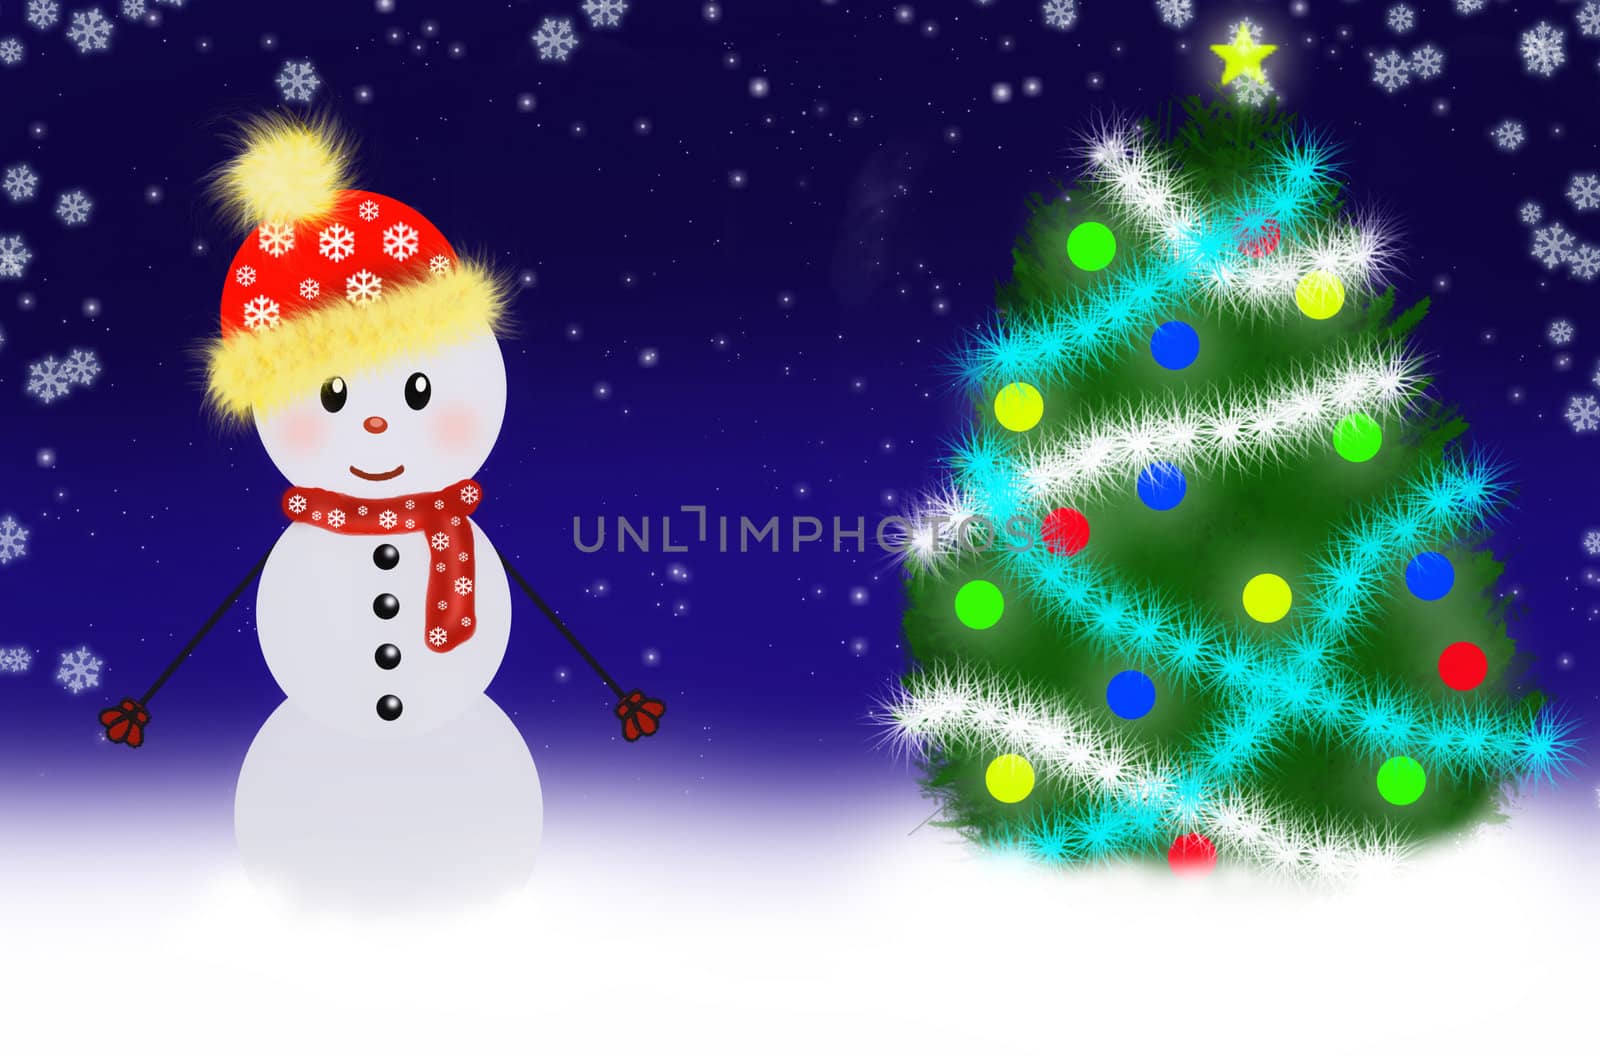 Snowman scene by nwp